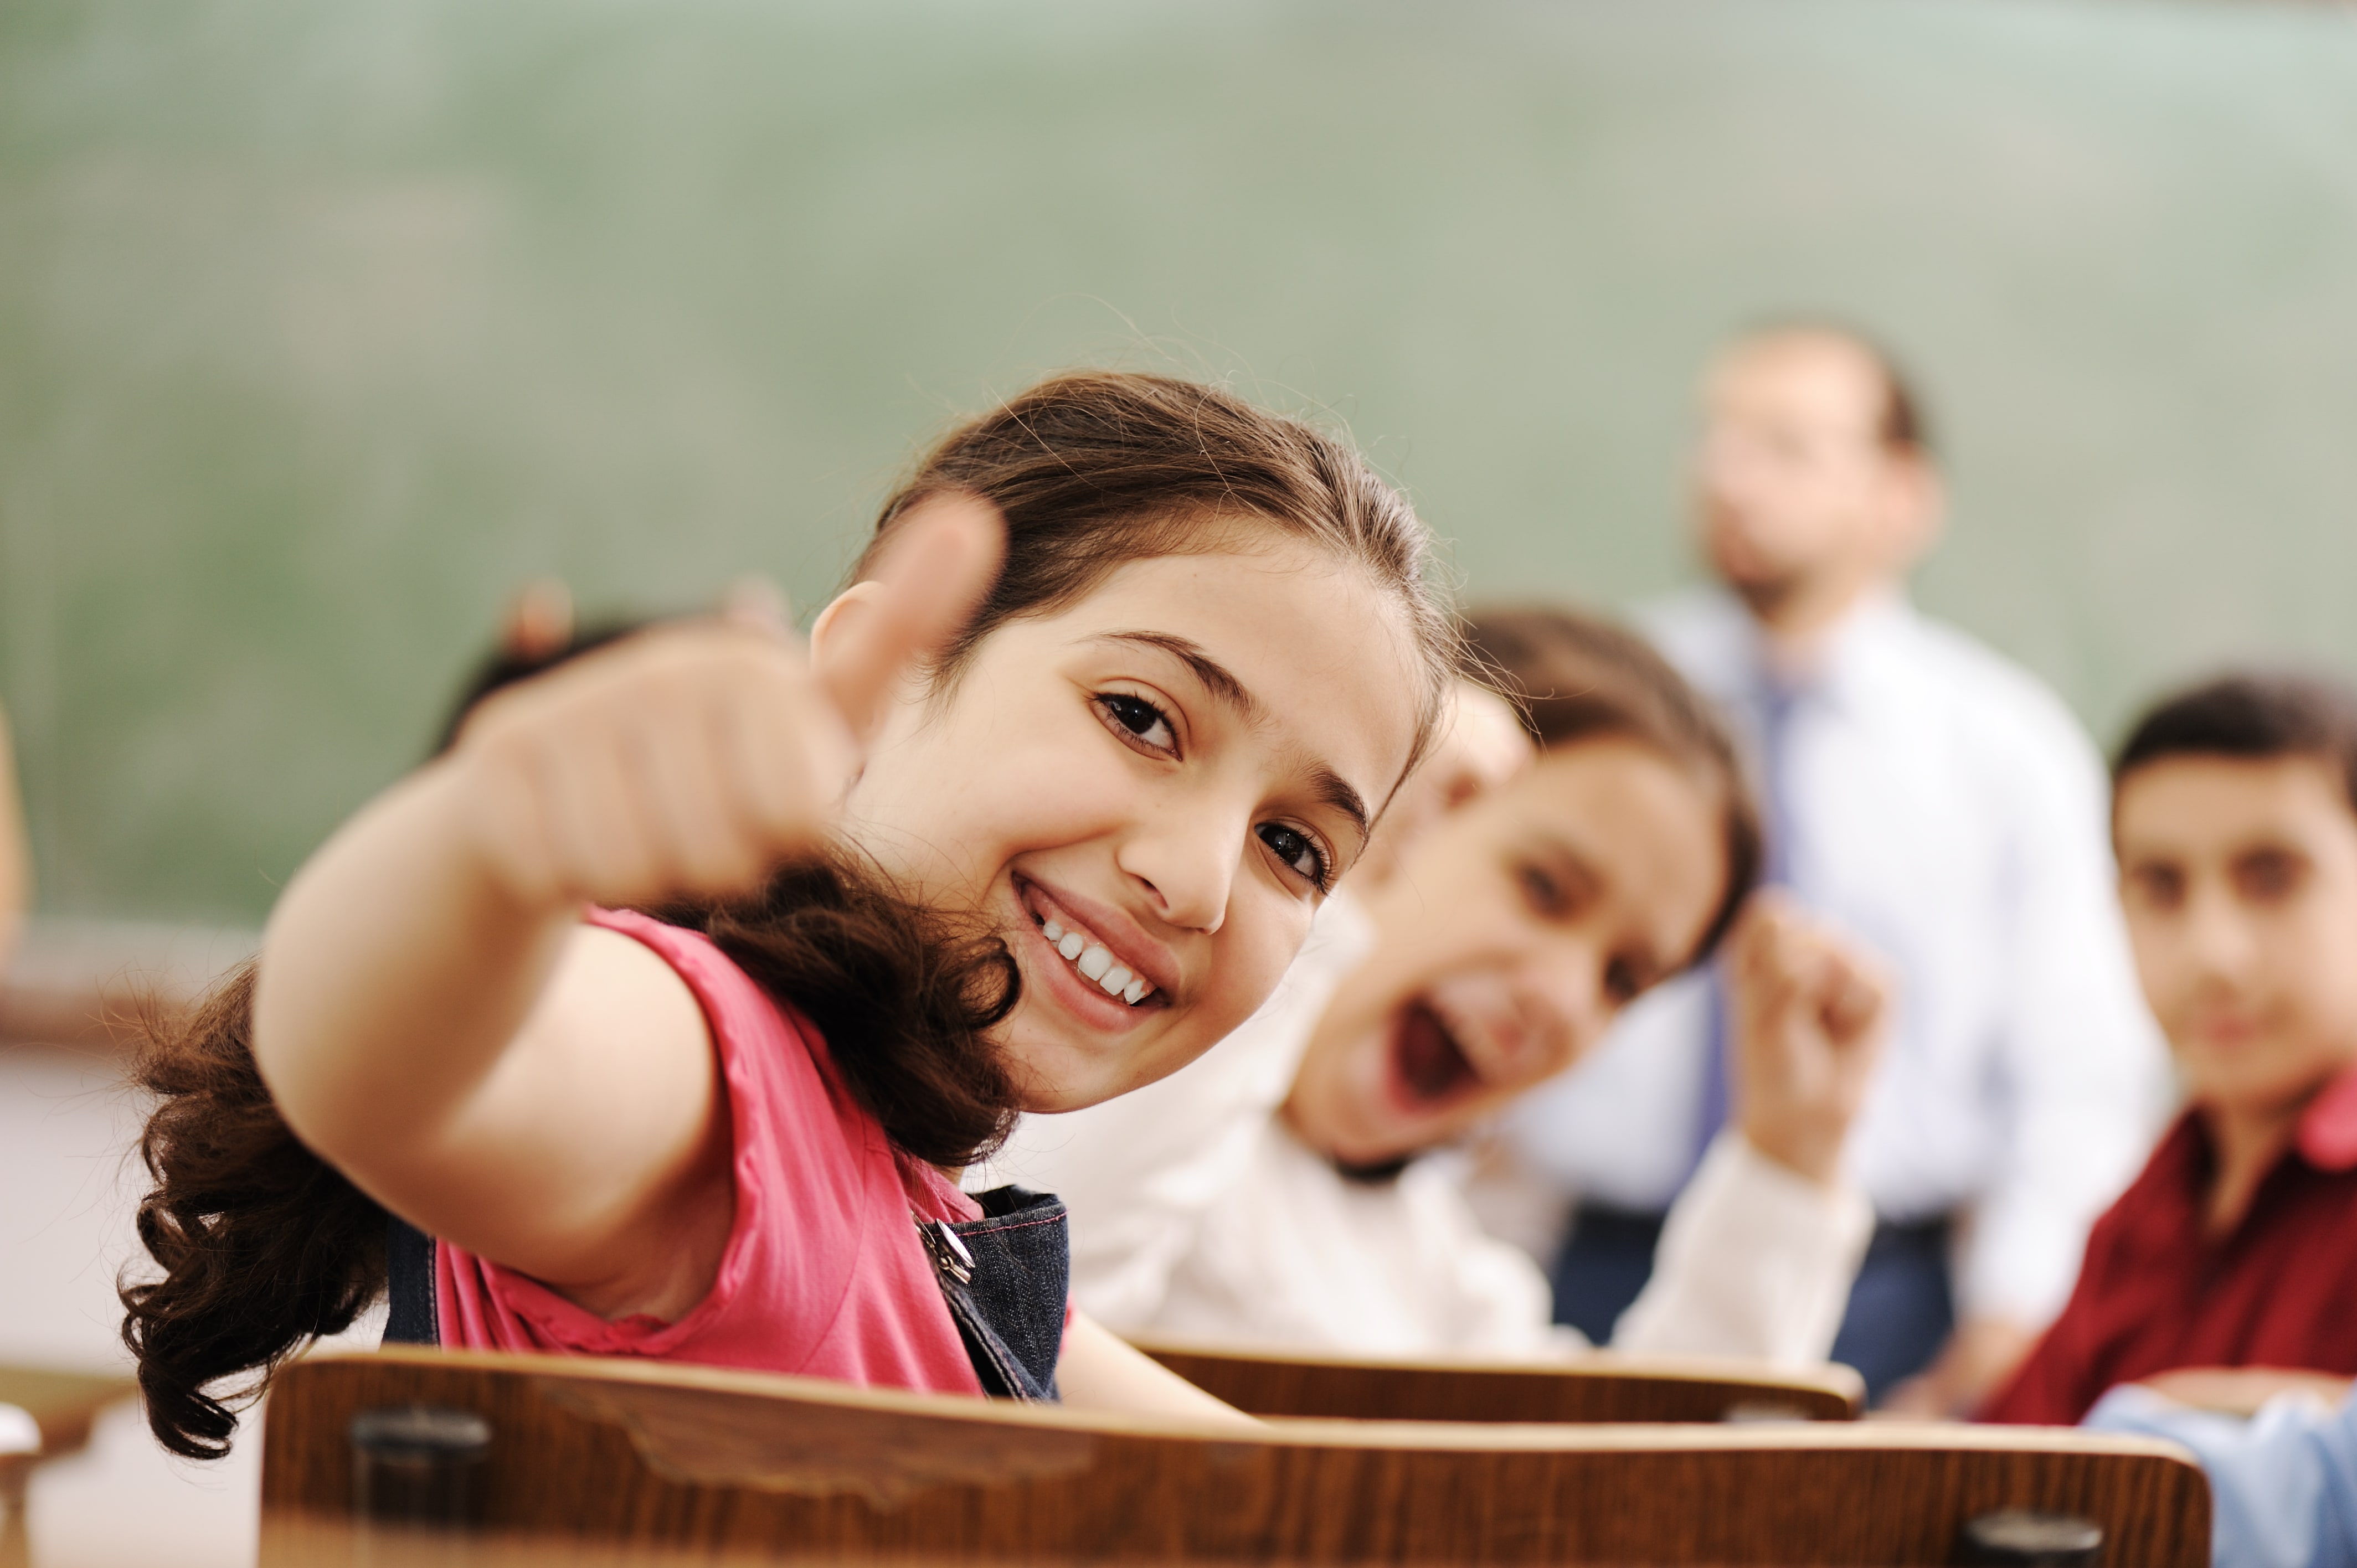 Girl in classroom giving thumbs up